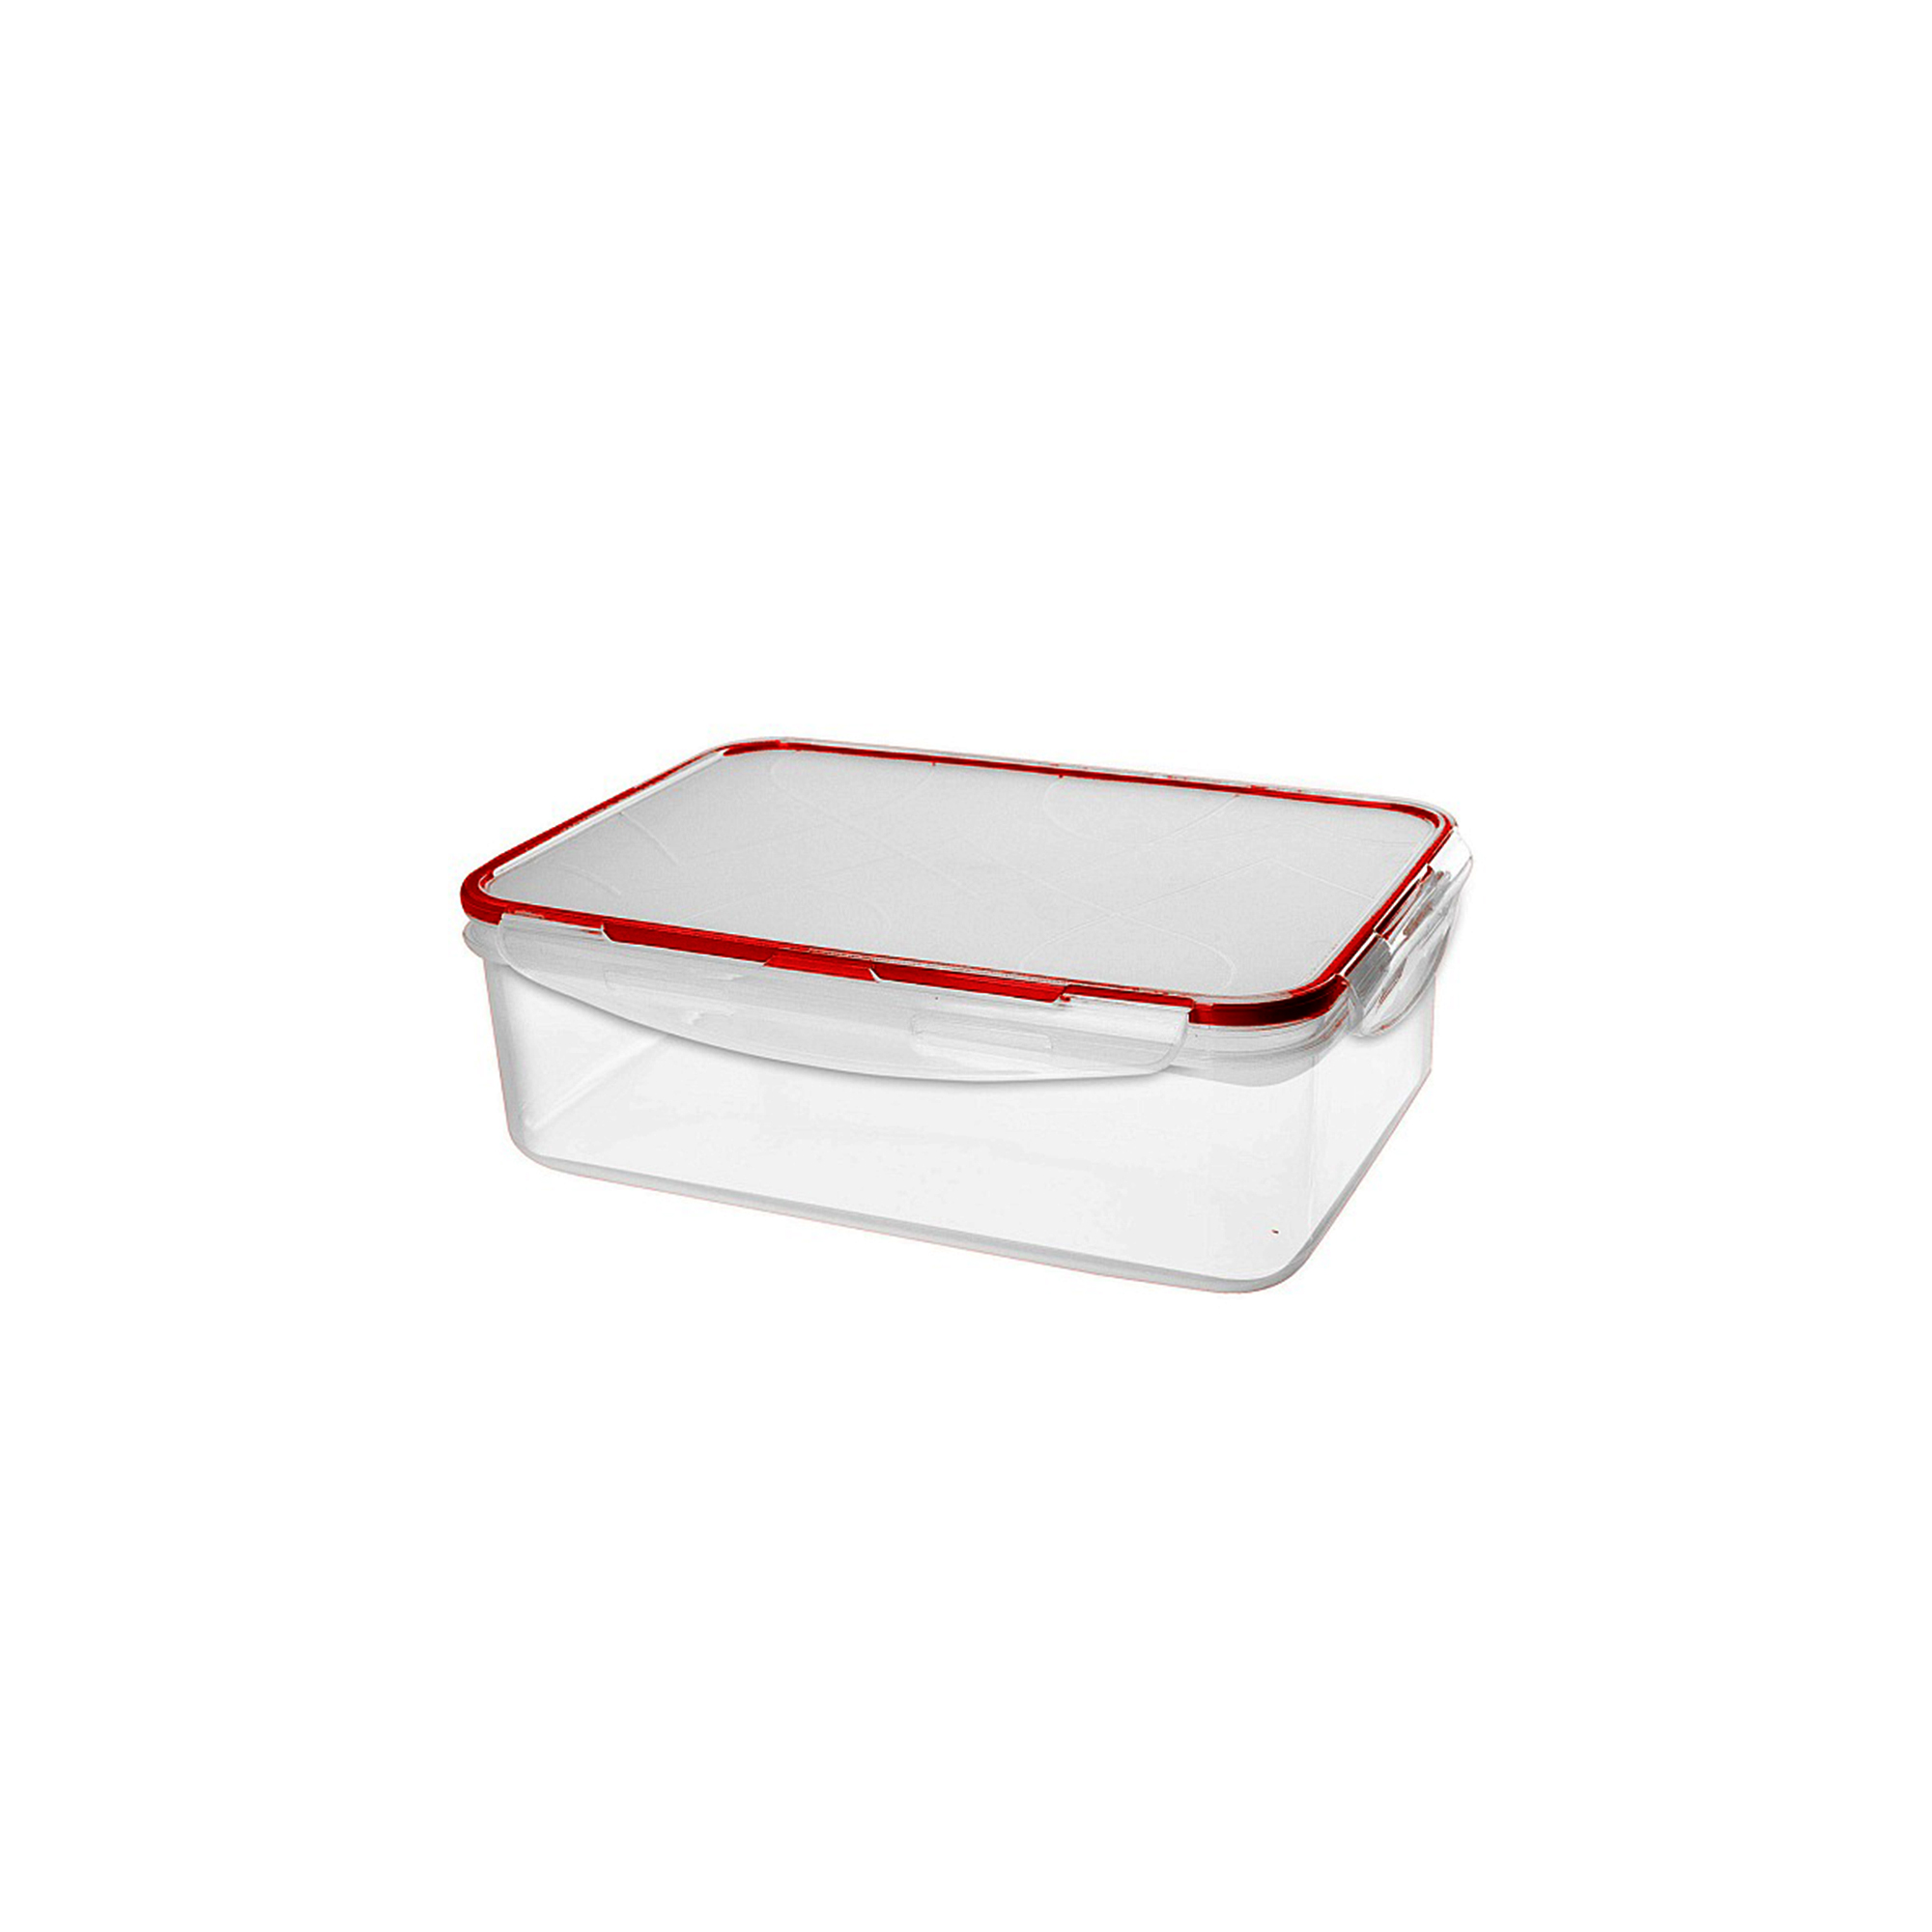 Food container   Modena